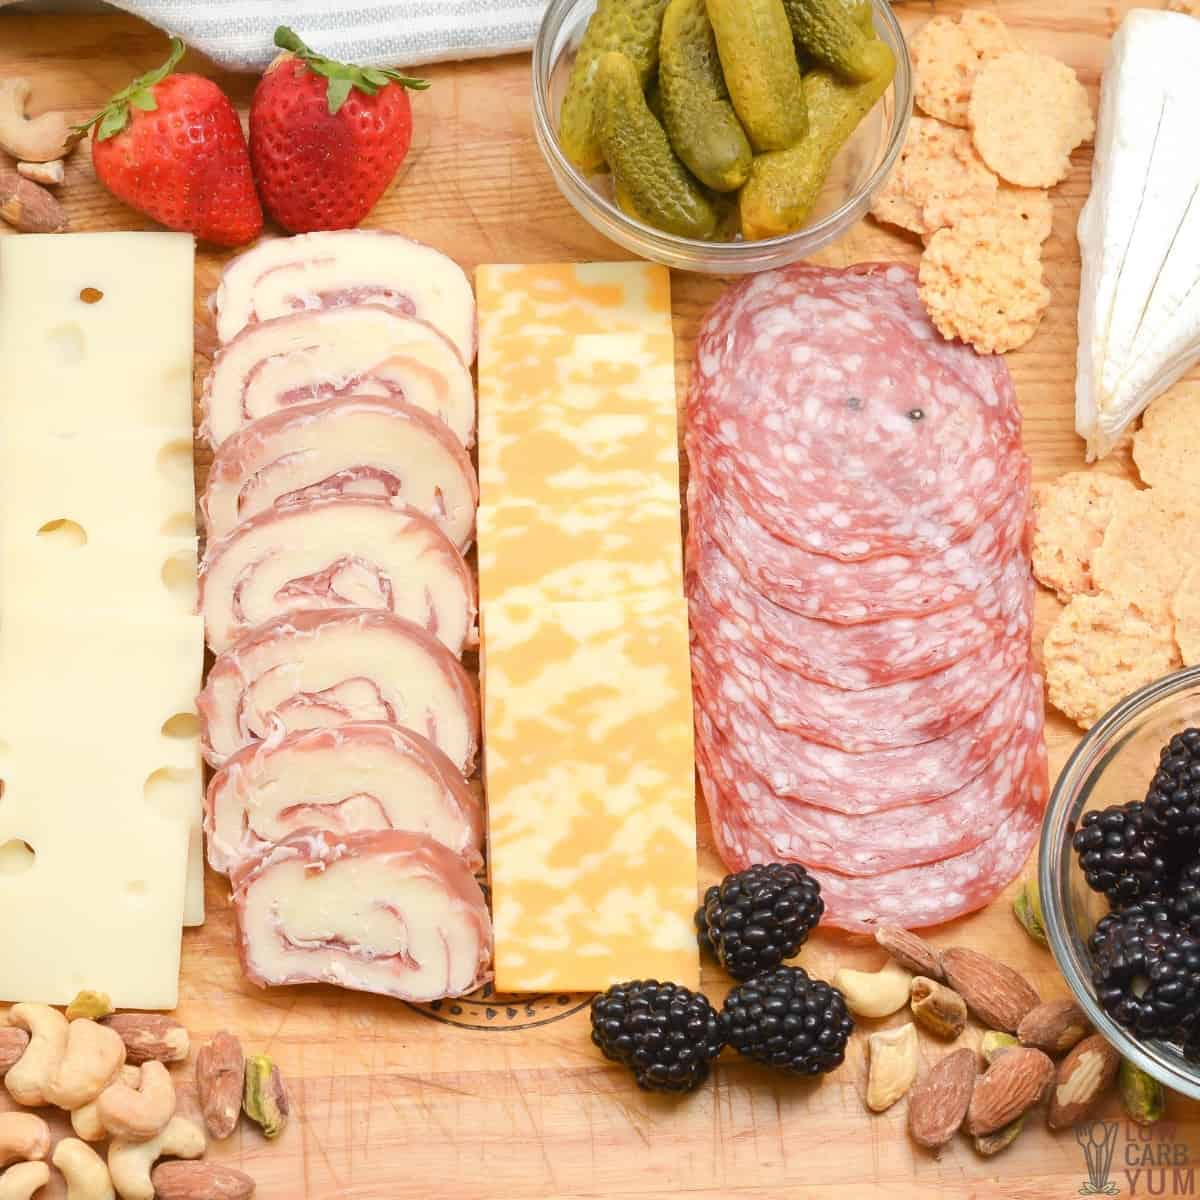 keto charcurterie board with meat cheese nuts fruit.